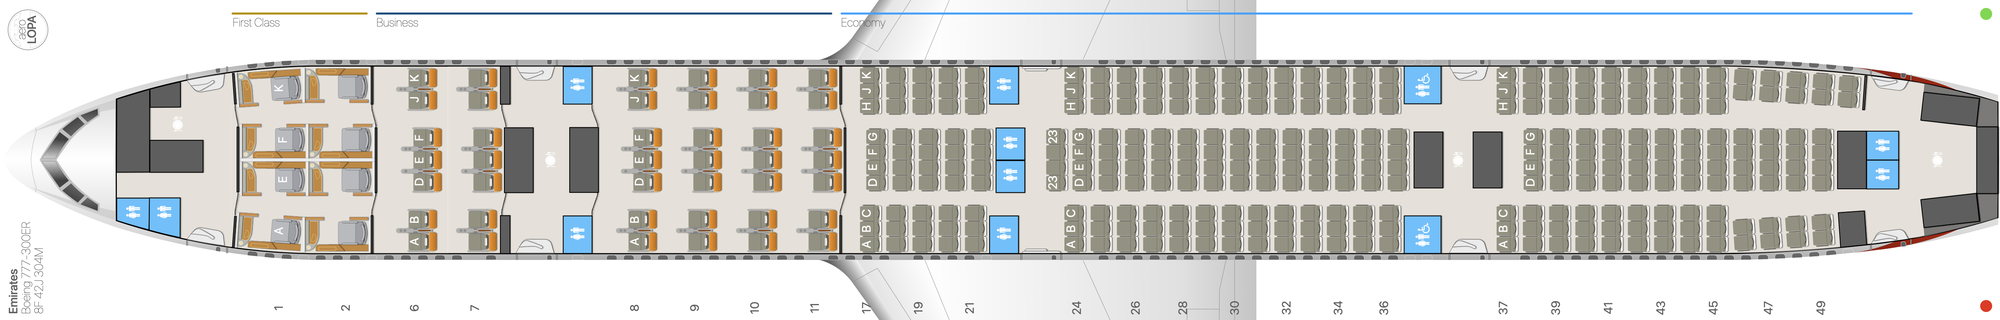 Accurate Seat Maps Of Emirates Aircraft Are Being Added To Aerolopa Flyertalk Forums